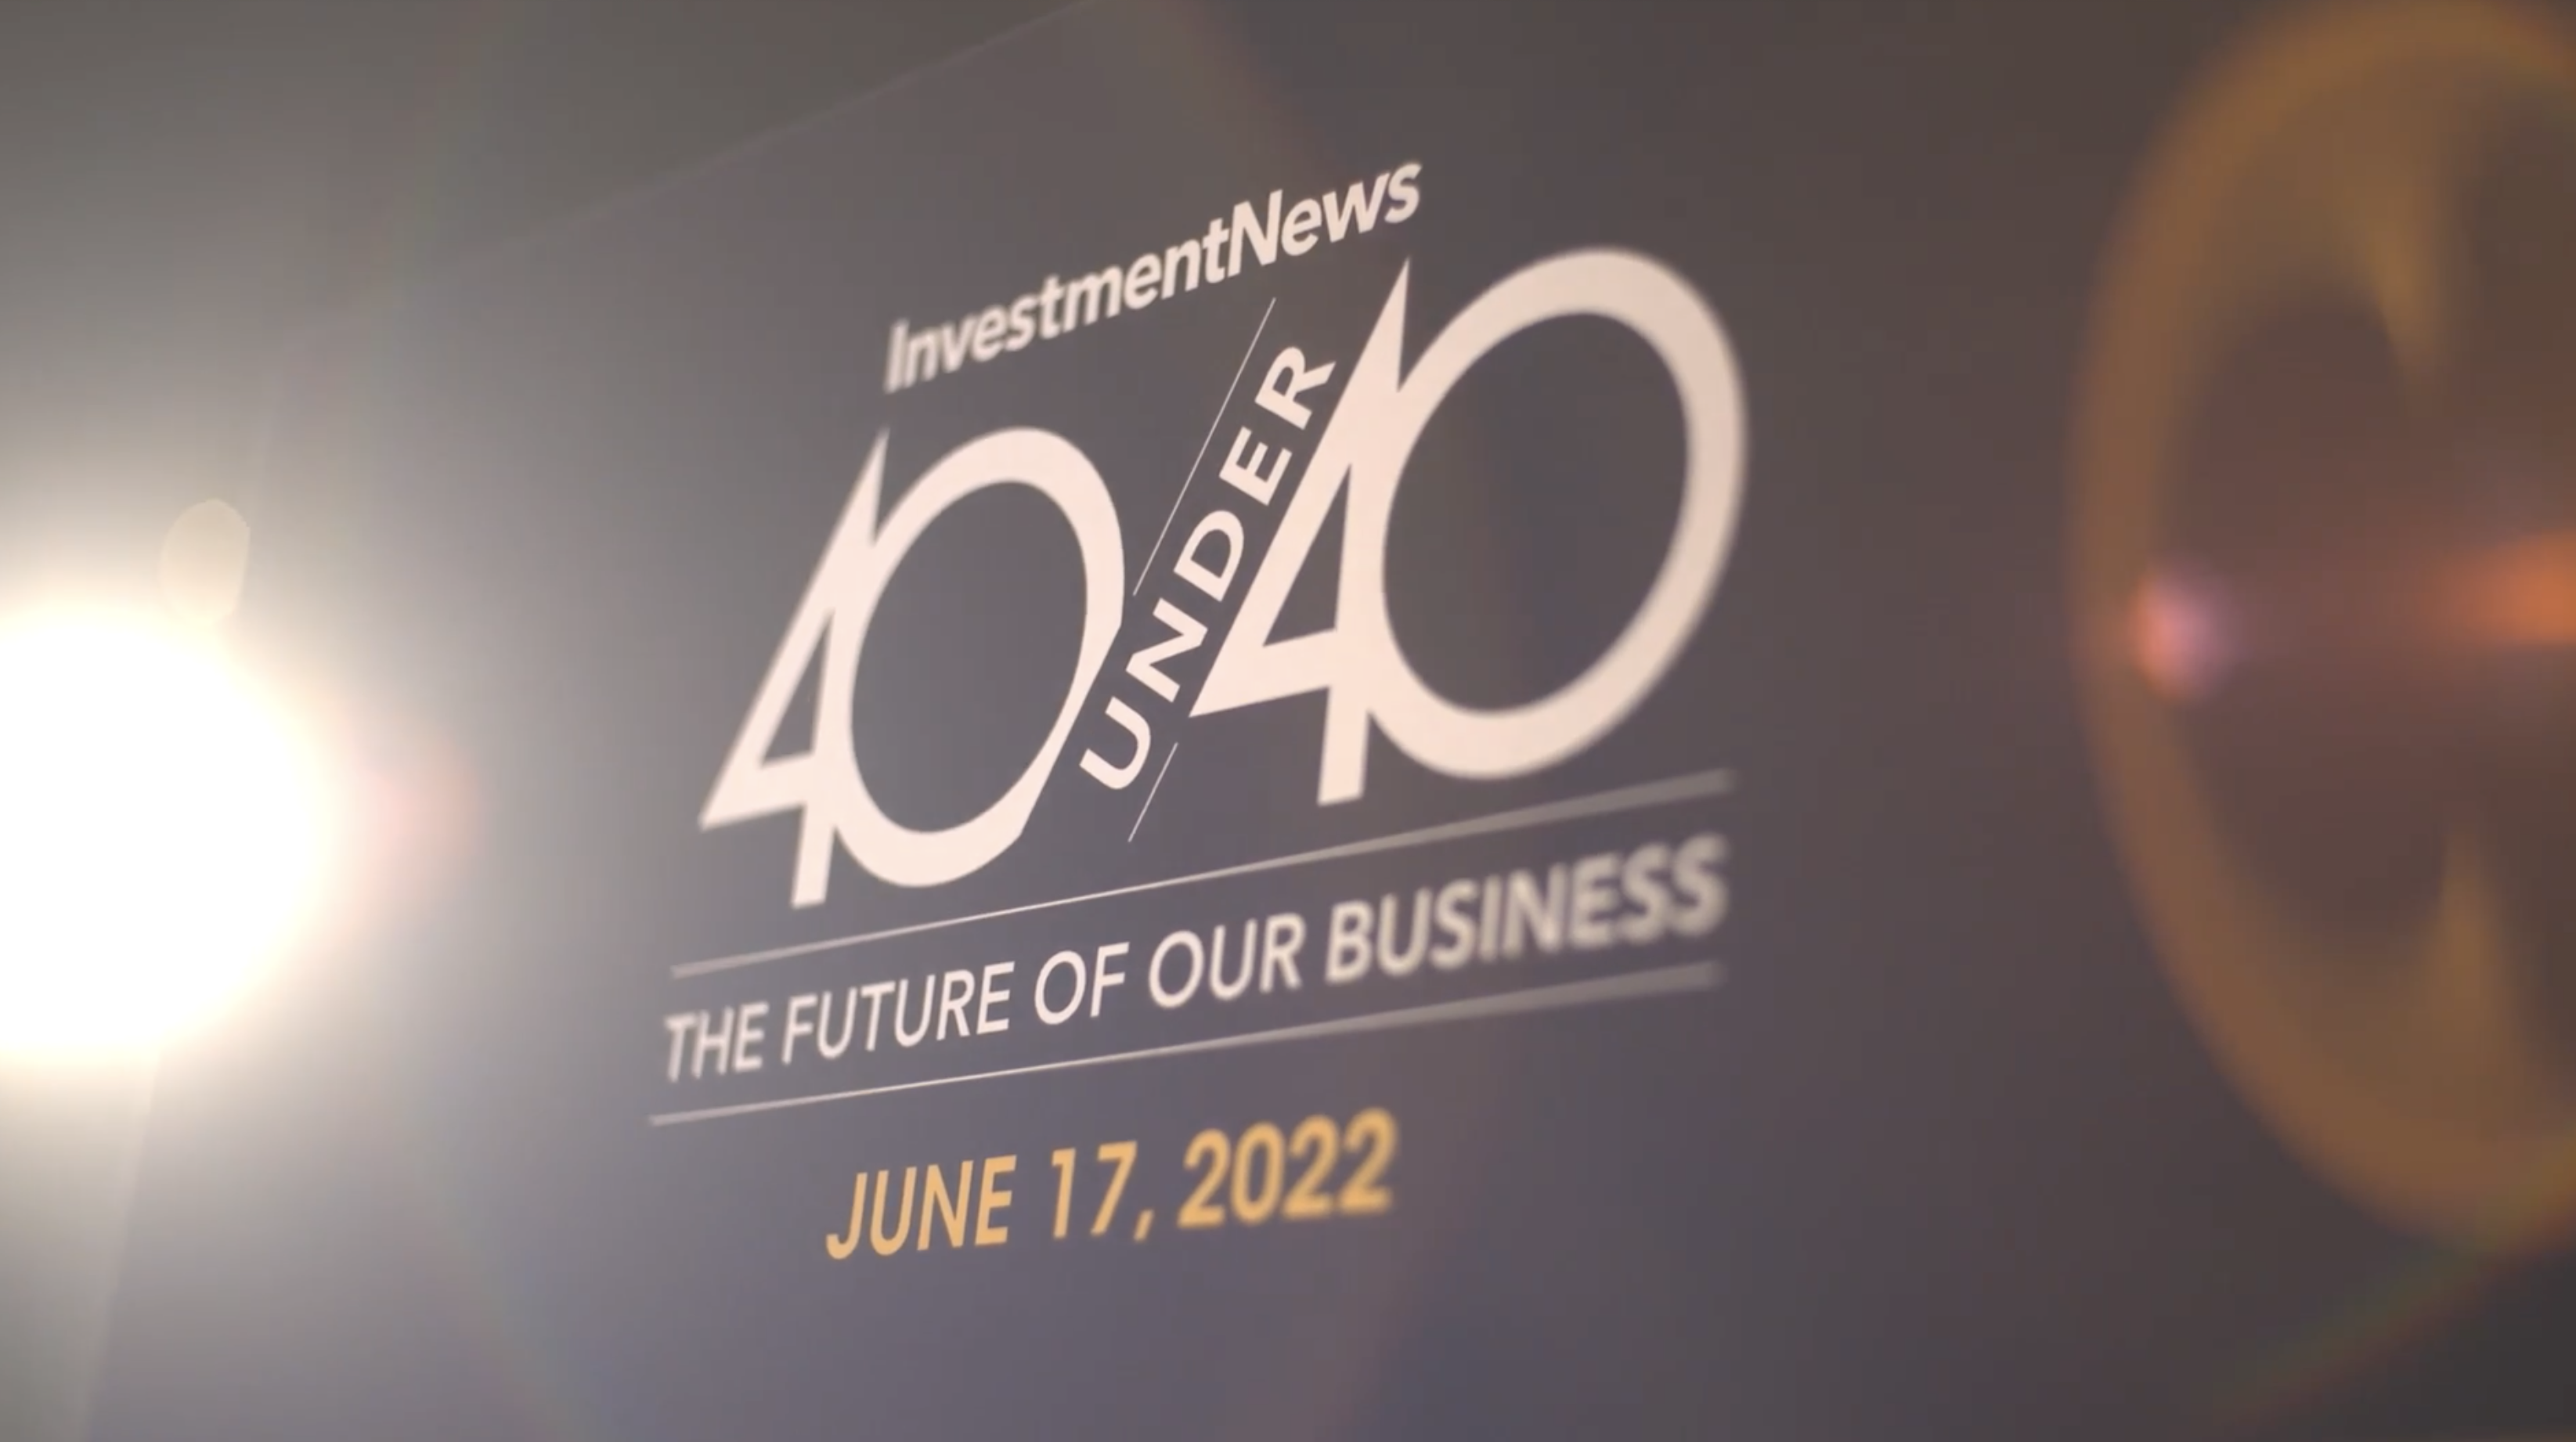 InvestmentNews 40 Under 40 event honors industry's rising stars